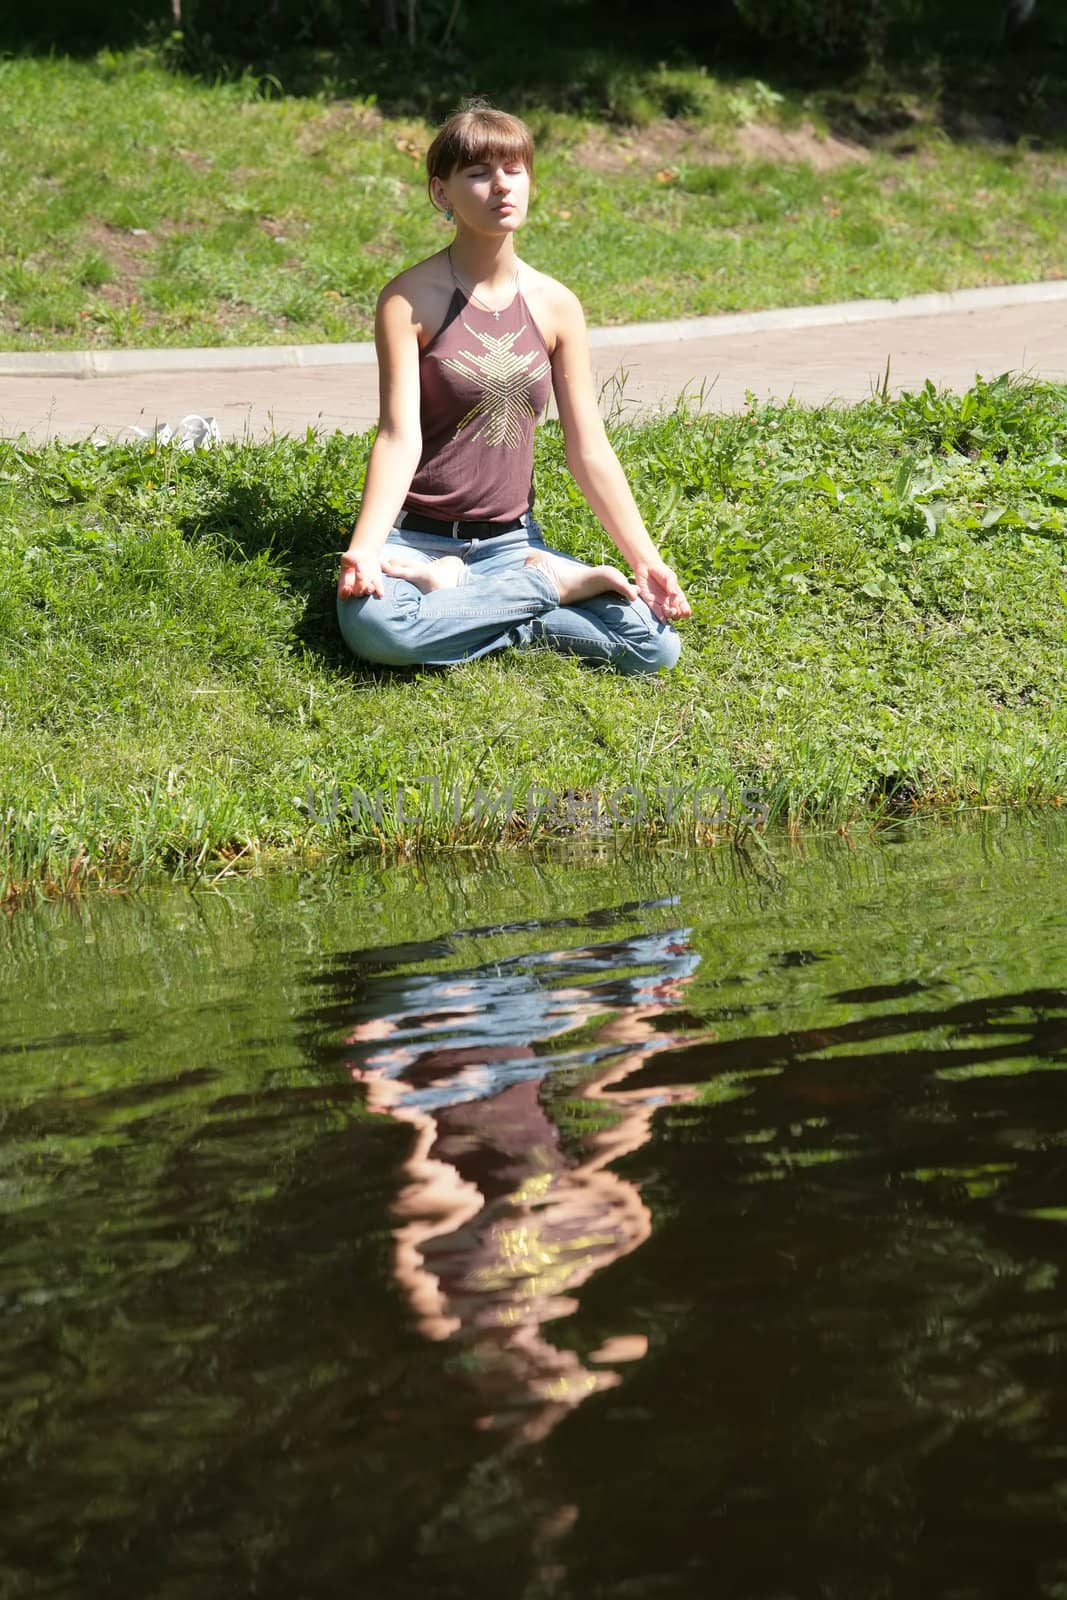 beautiful girl meditating near by water with reflections